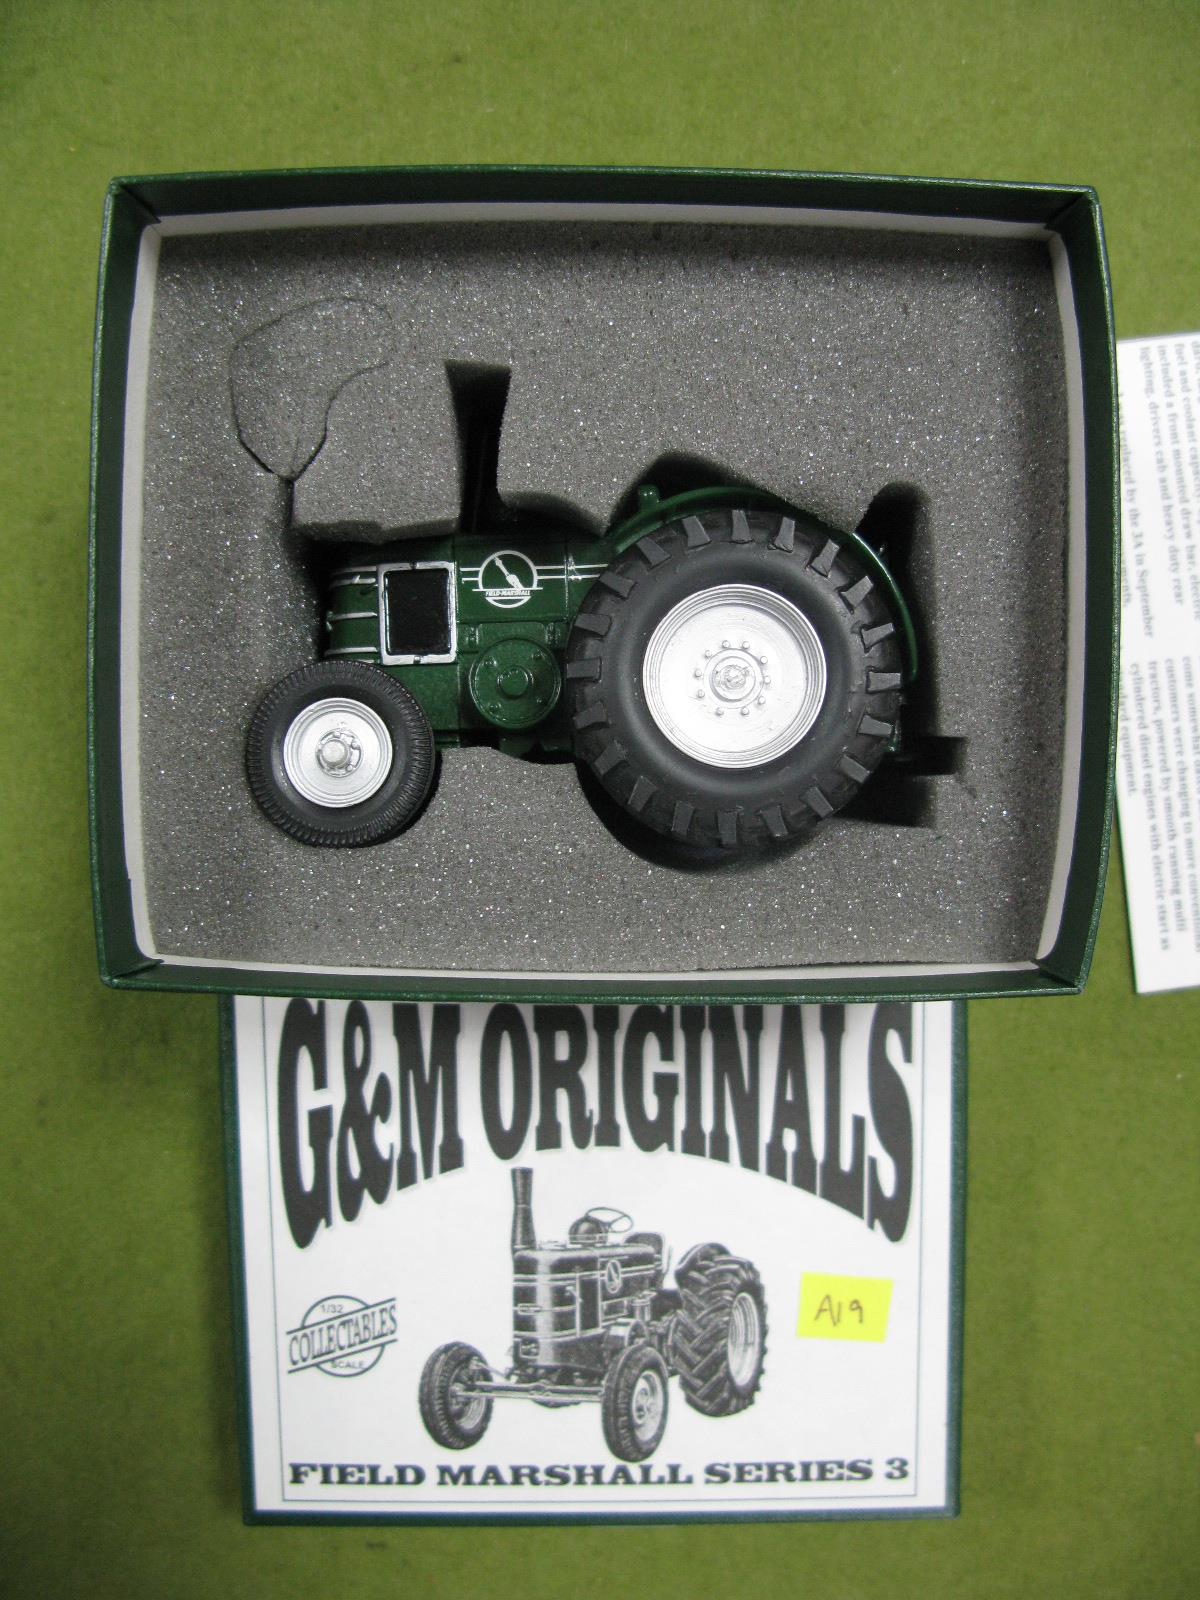 A Boxed G and M Originals Diecast Model Field Marshall Series 3 Tractor 'Green'.